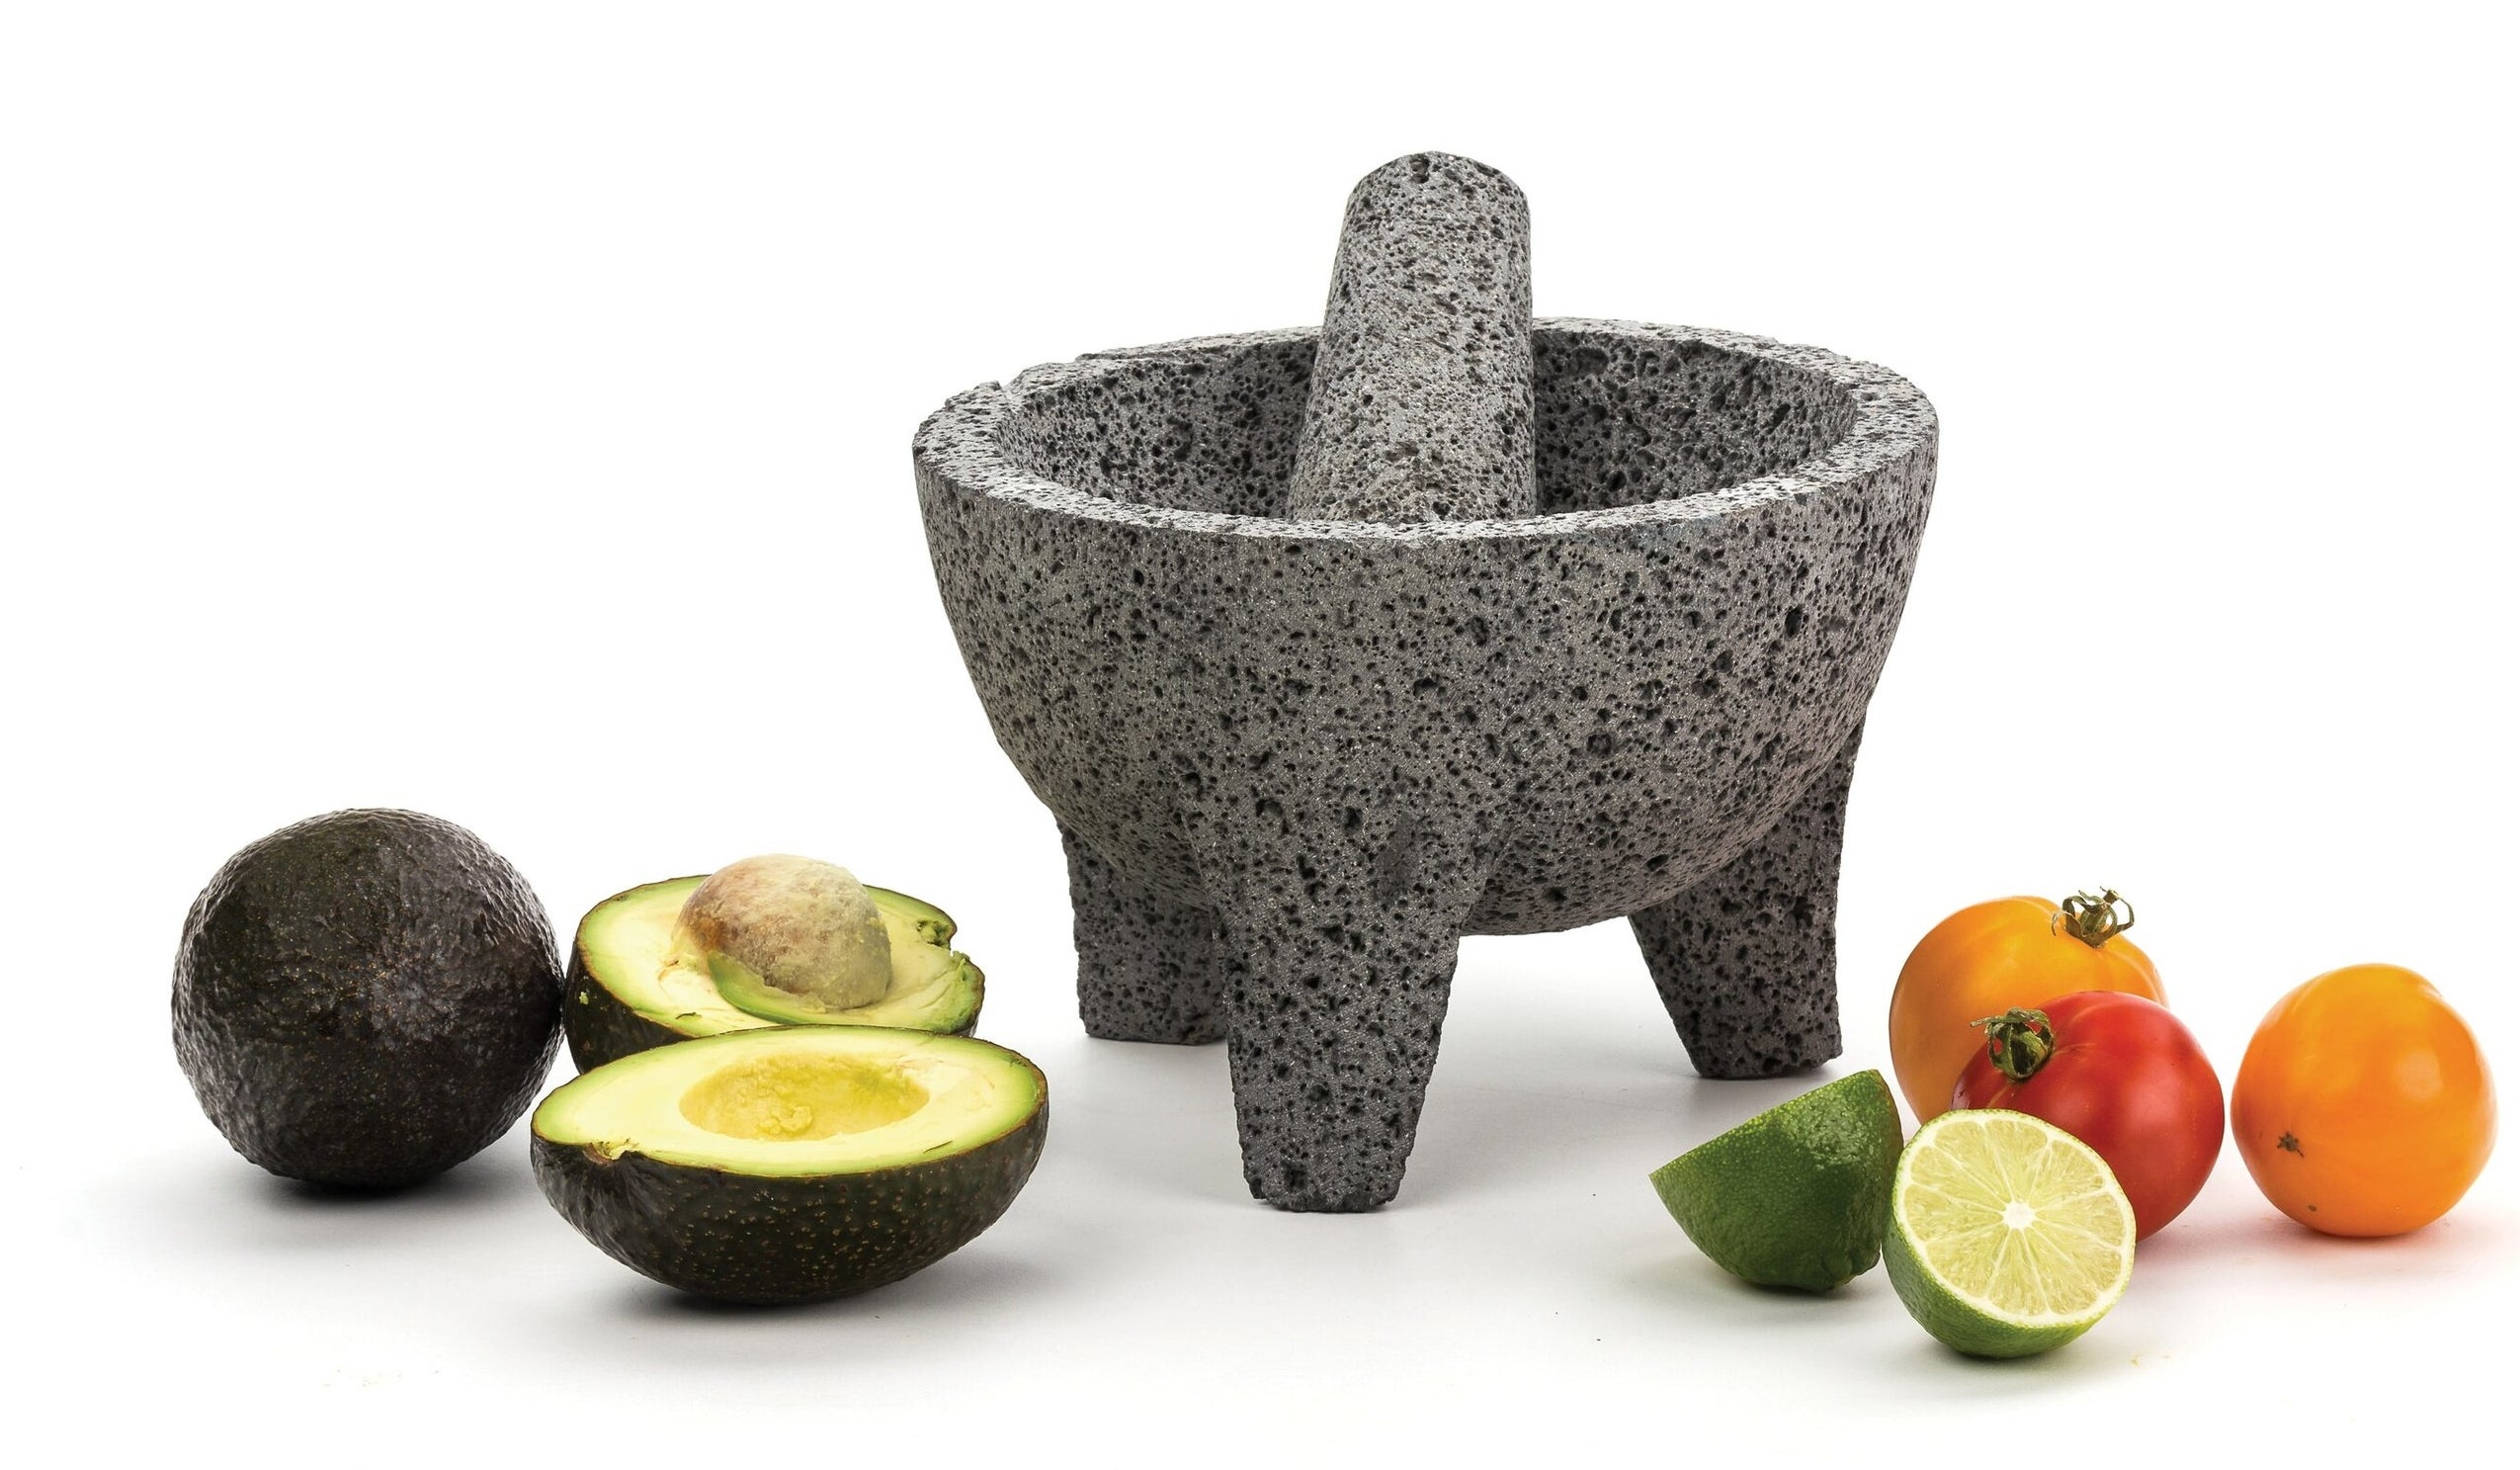 The molcajete surrounded by avocado, tomatoes and limes